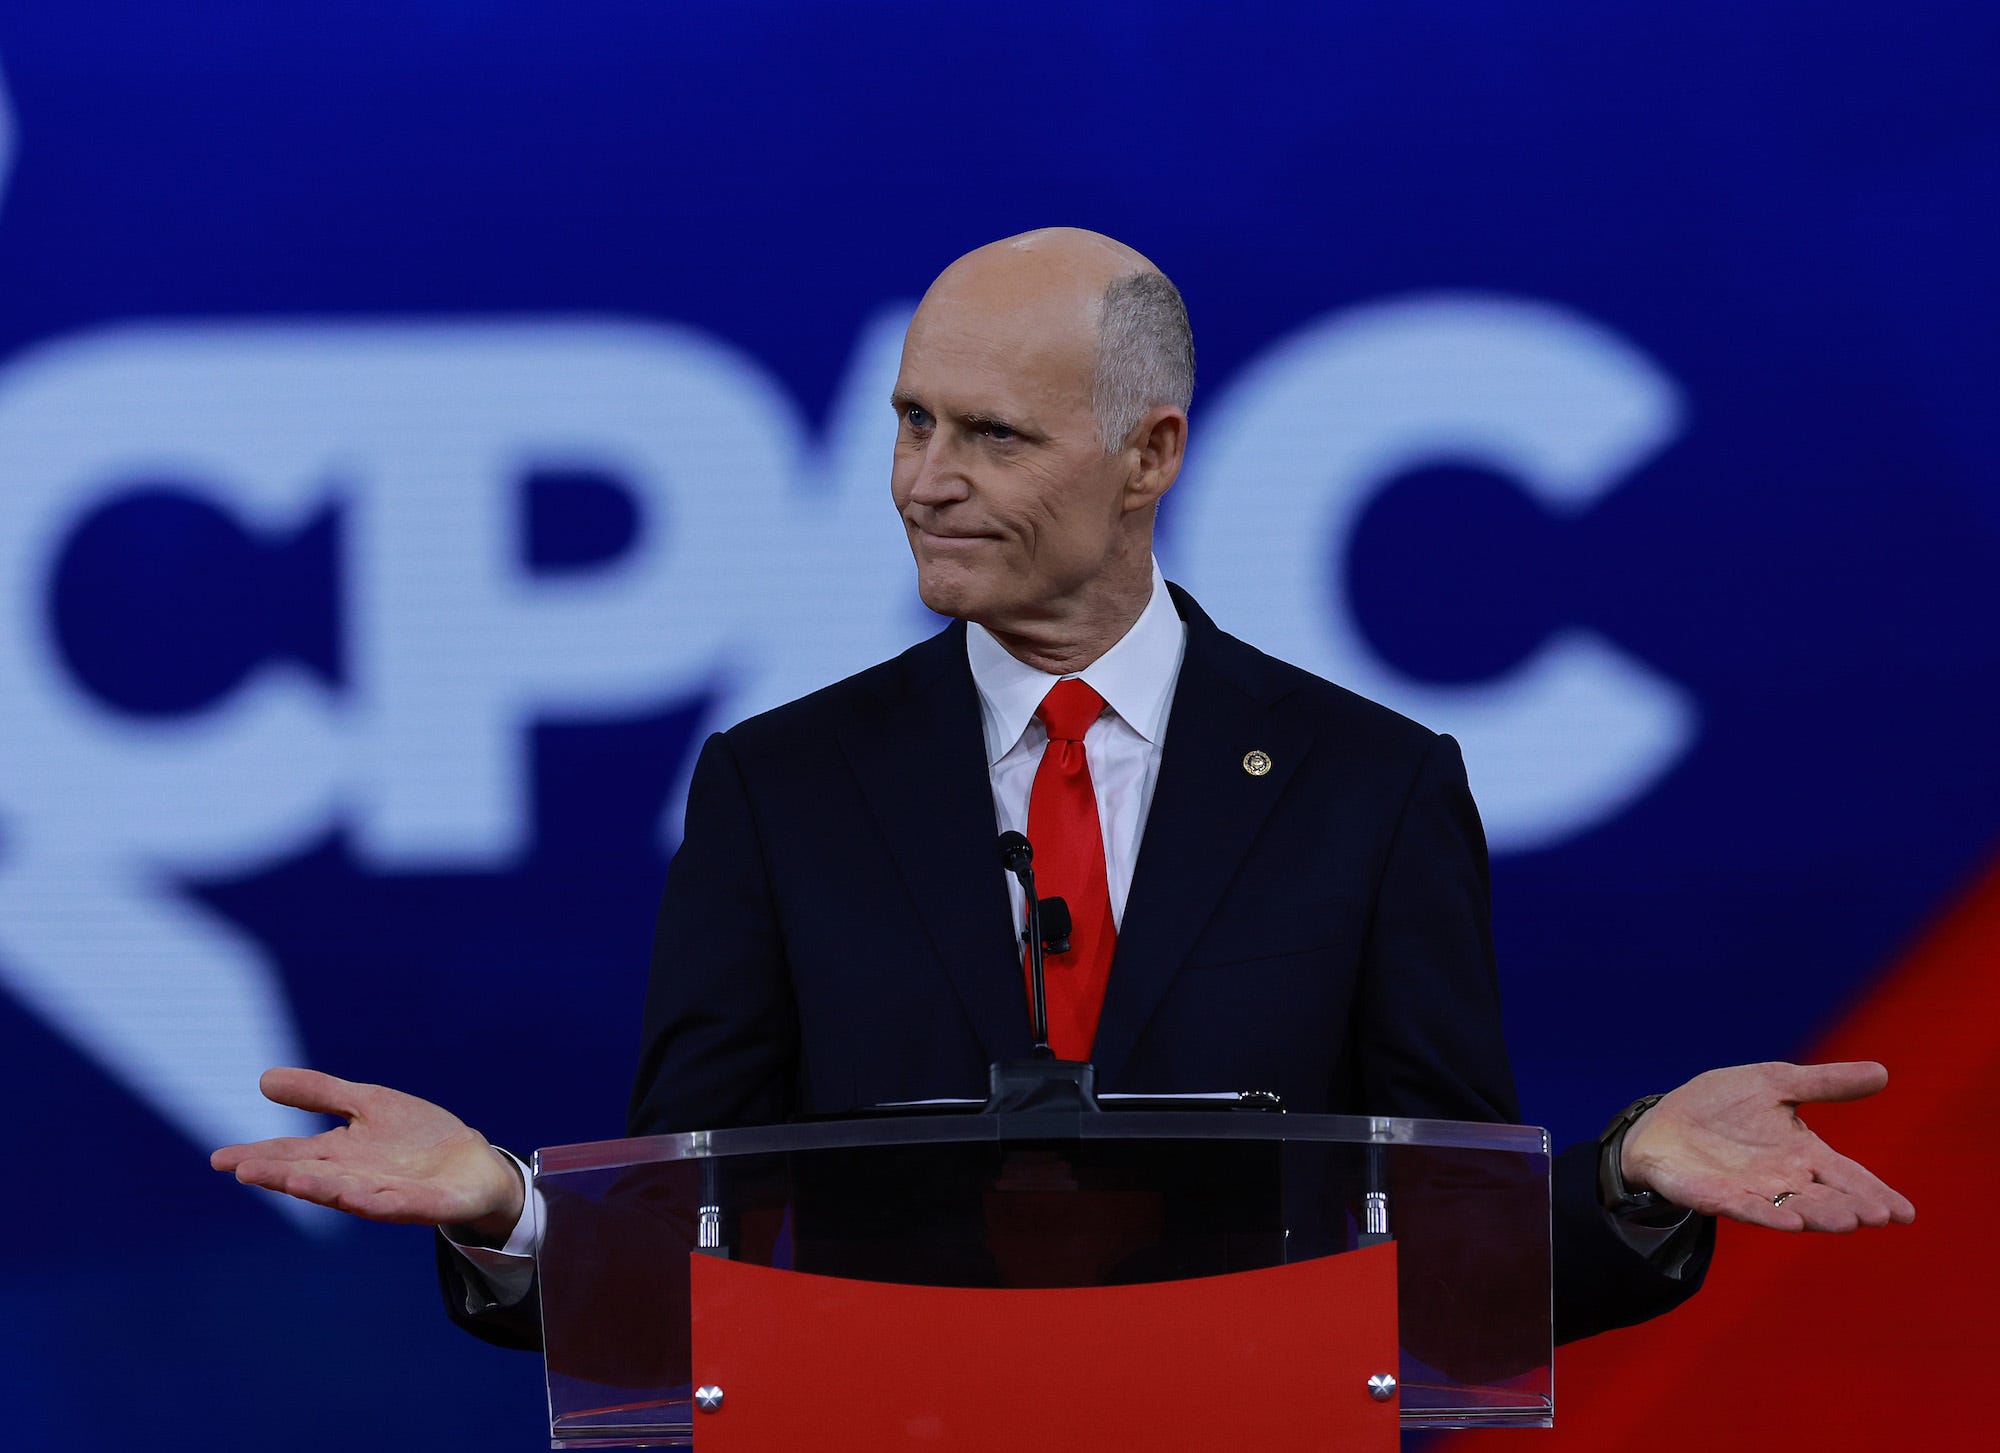 Republican Sen. Rick Scott of Florida, sporting a dark suit, white shirt, and bright red tie, stands with his hands open wide during a speech before the Conservative Political Action Conference in Orlando, Florida.